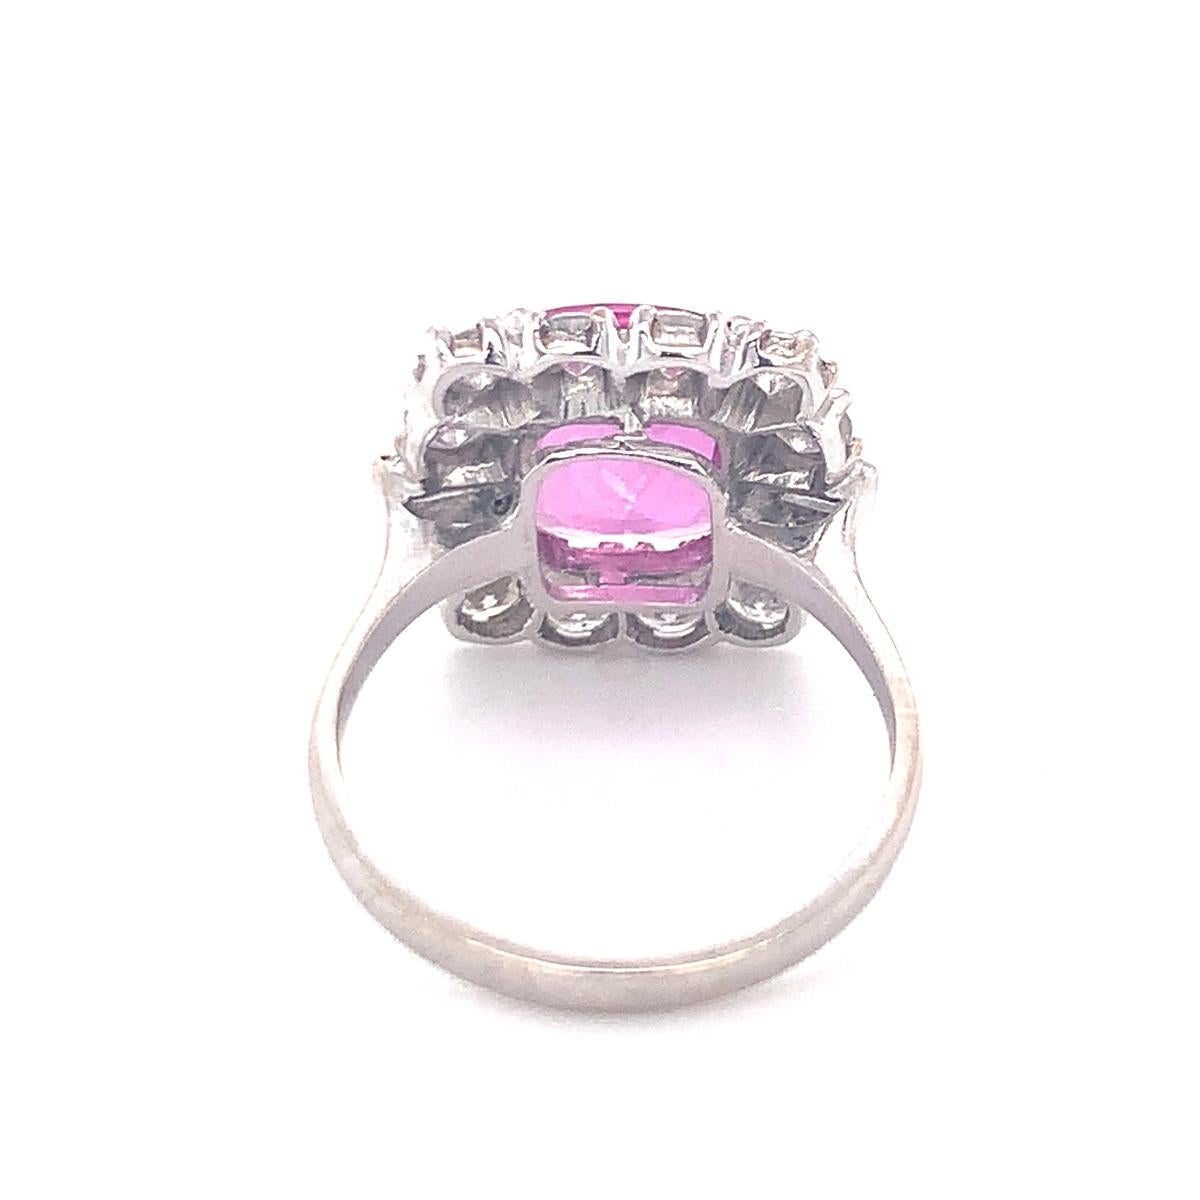 Women's Gia Certified 4.10 Ct. Pink Sapphire and Diamond White Gold Ring, circa 1950s For Sale